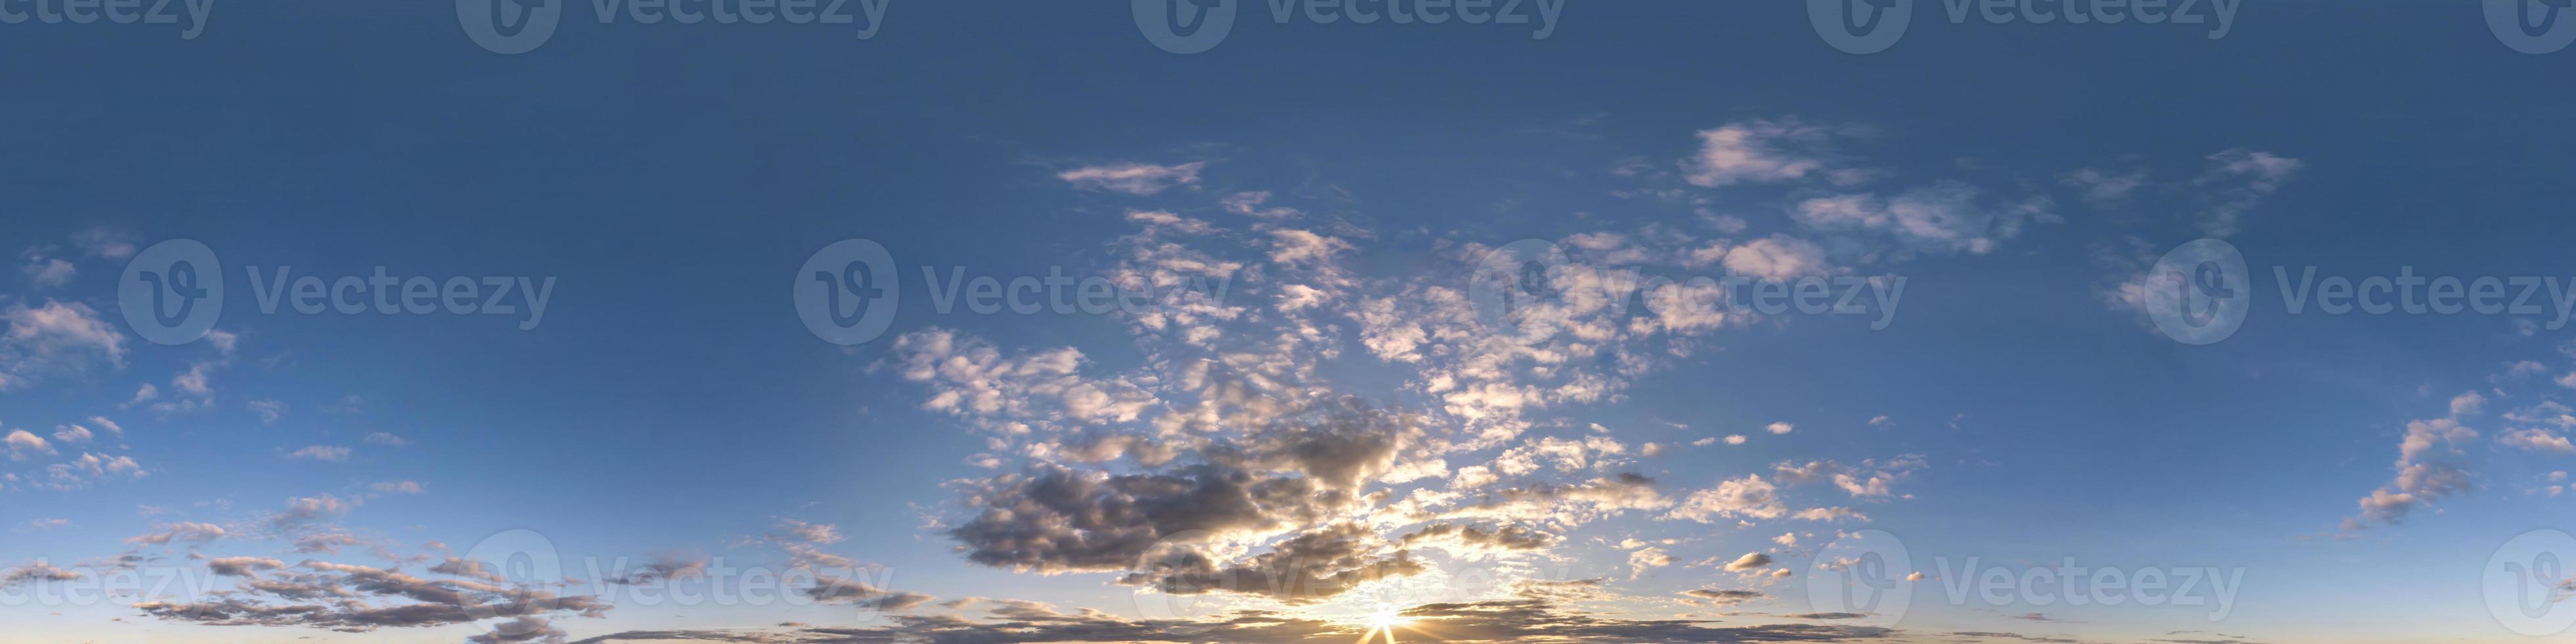 Seamless evening  blue sky hdri panorama 360 degrees angle view with zenith and beautiful clouds for use in 3d graphics as sky dome or edit drone shot photo